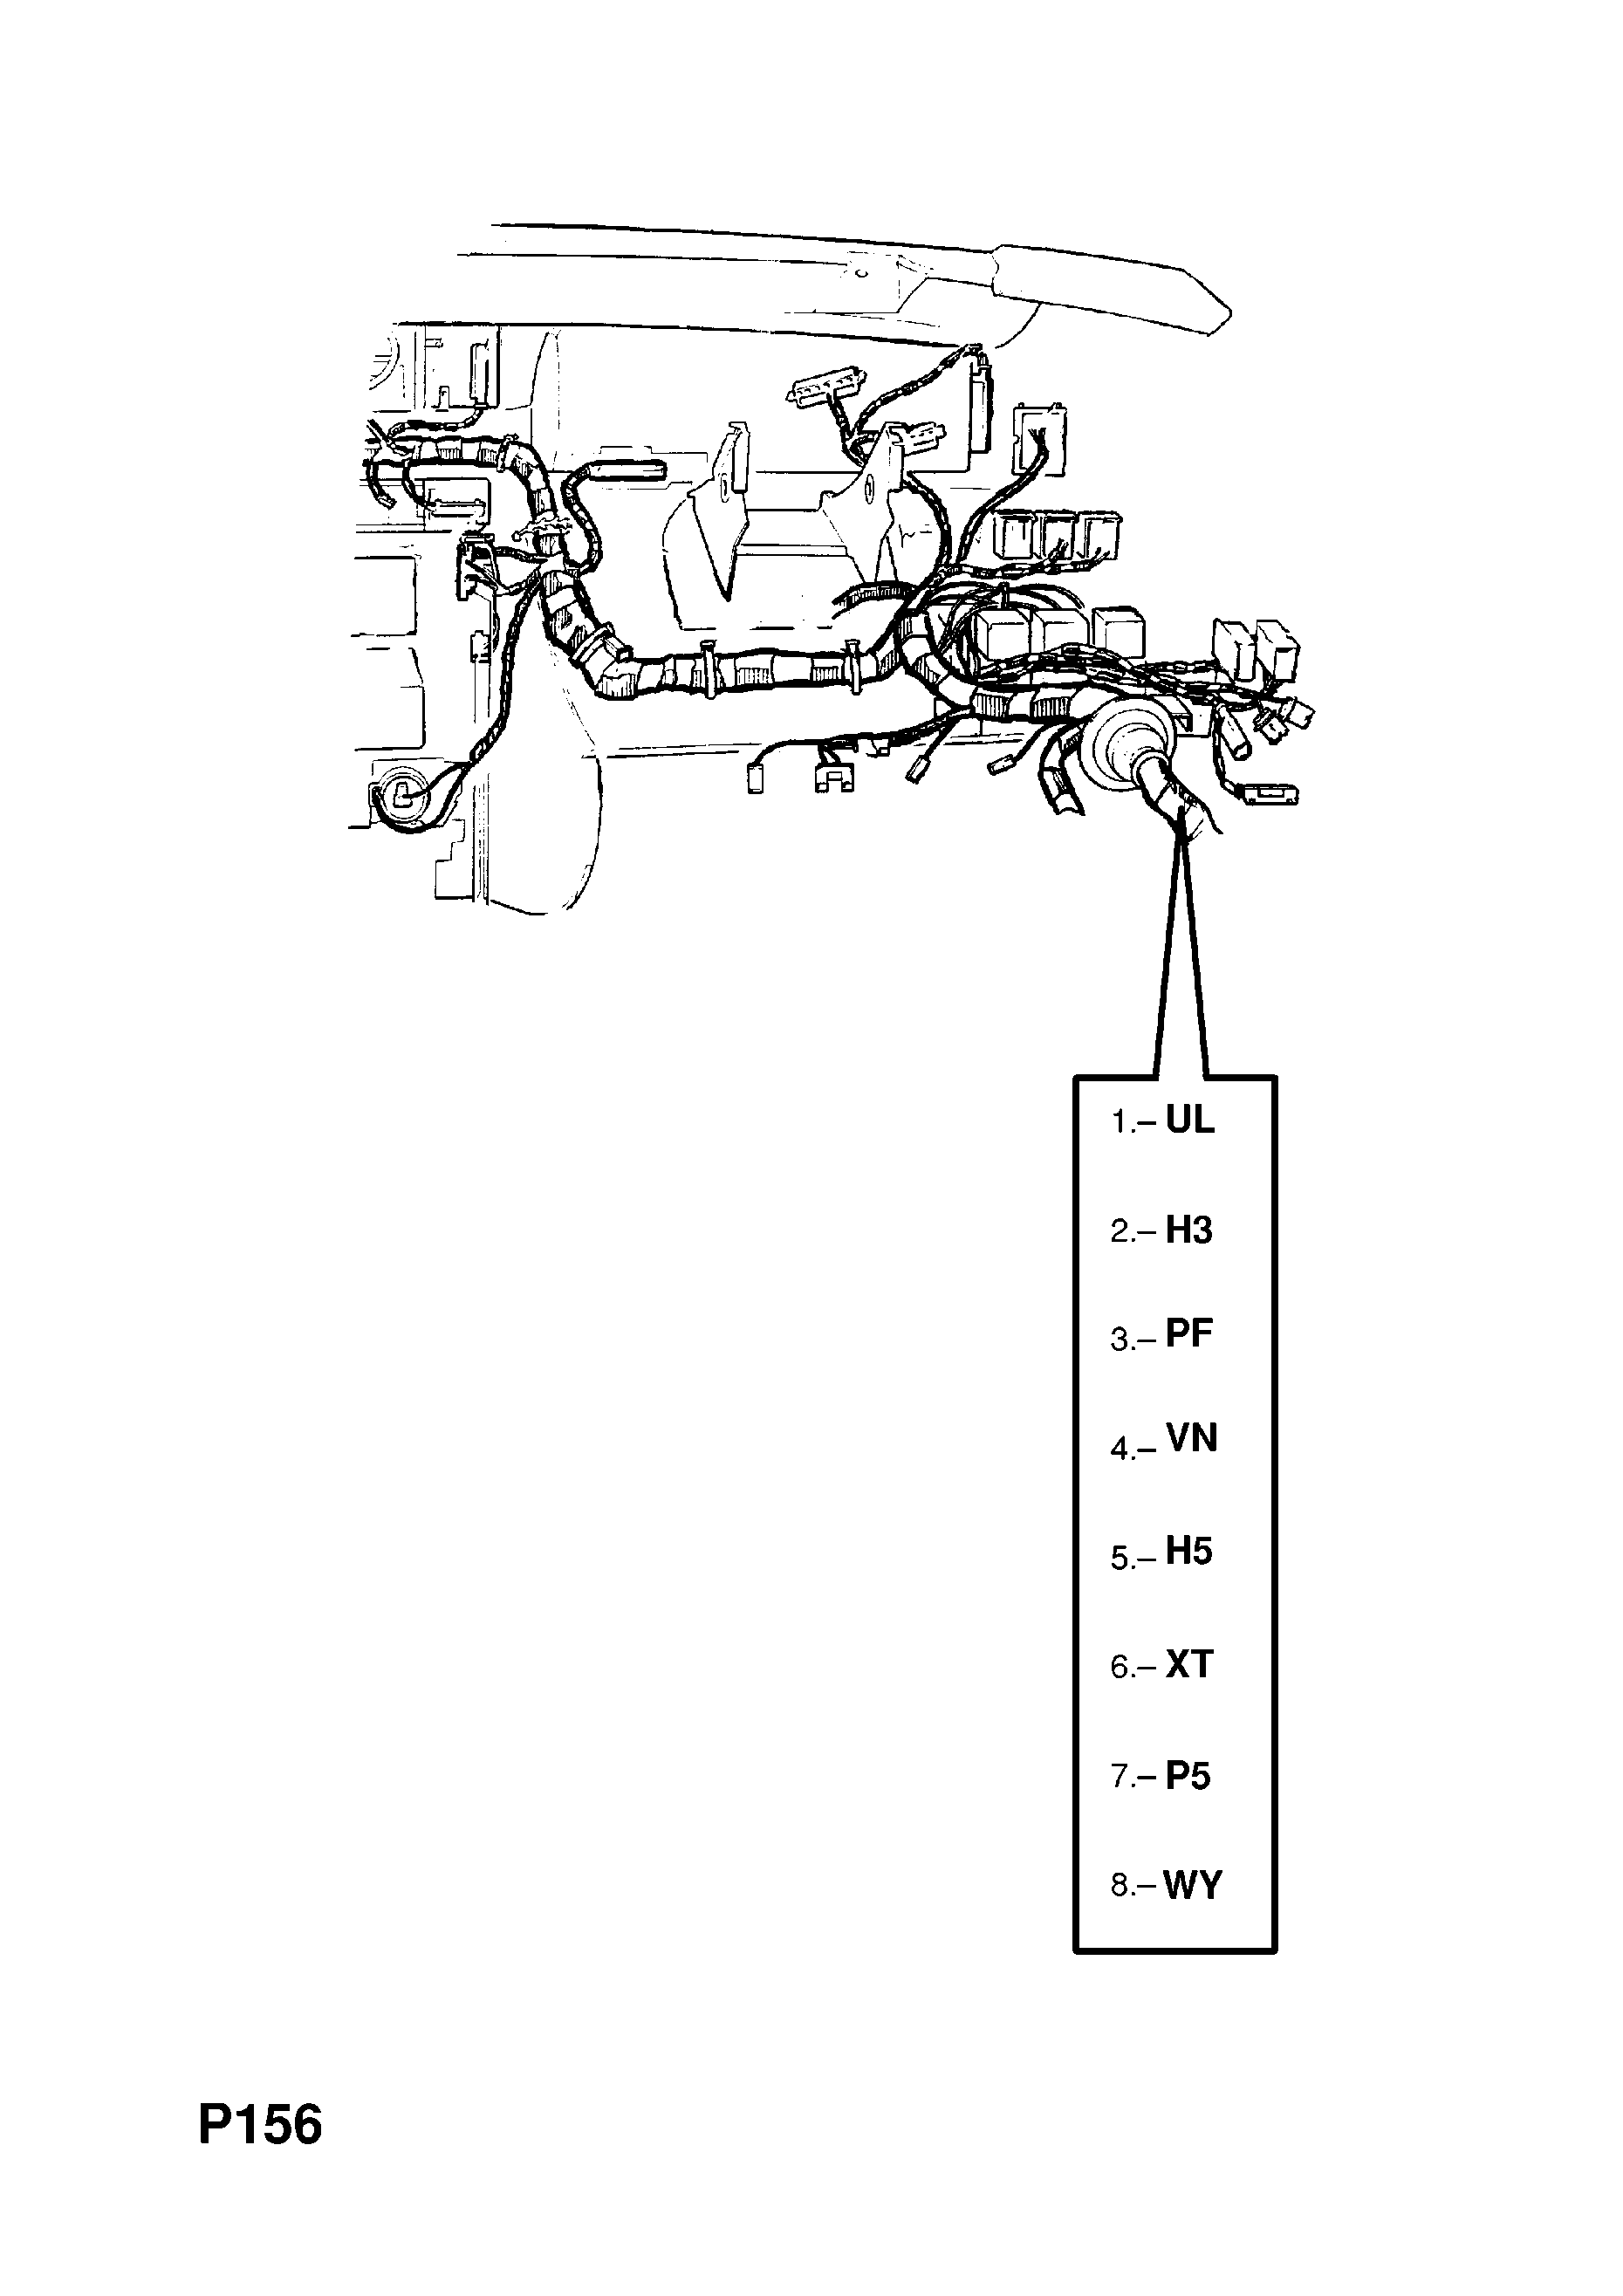 INSTRUMENT PANEL WIRING HARNESS (CONTD.) <small><i>[M1000001- FOR AUTOMATIC TRANSMISSION AND LCD INSTRUMENTS EXCEPT AIR CONDITIONING]</i></small>